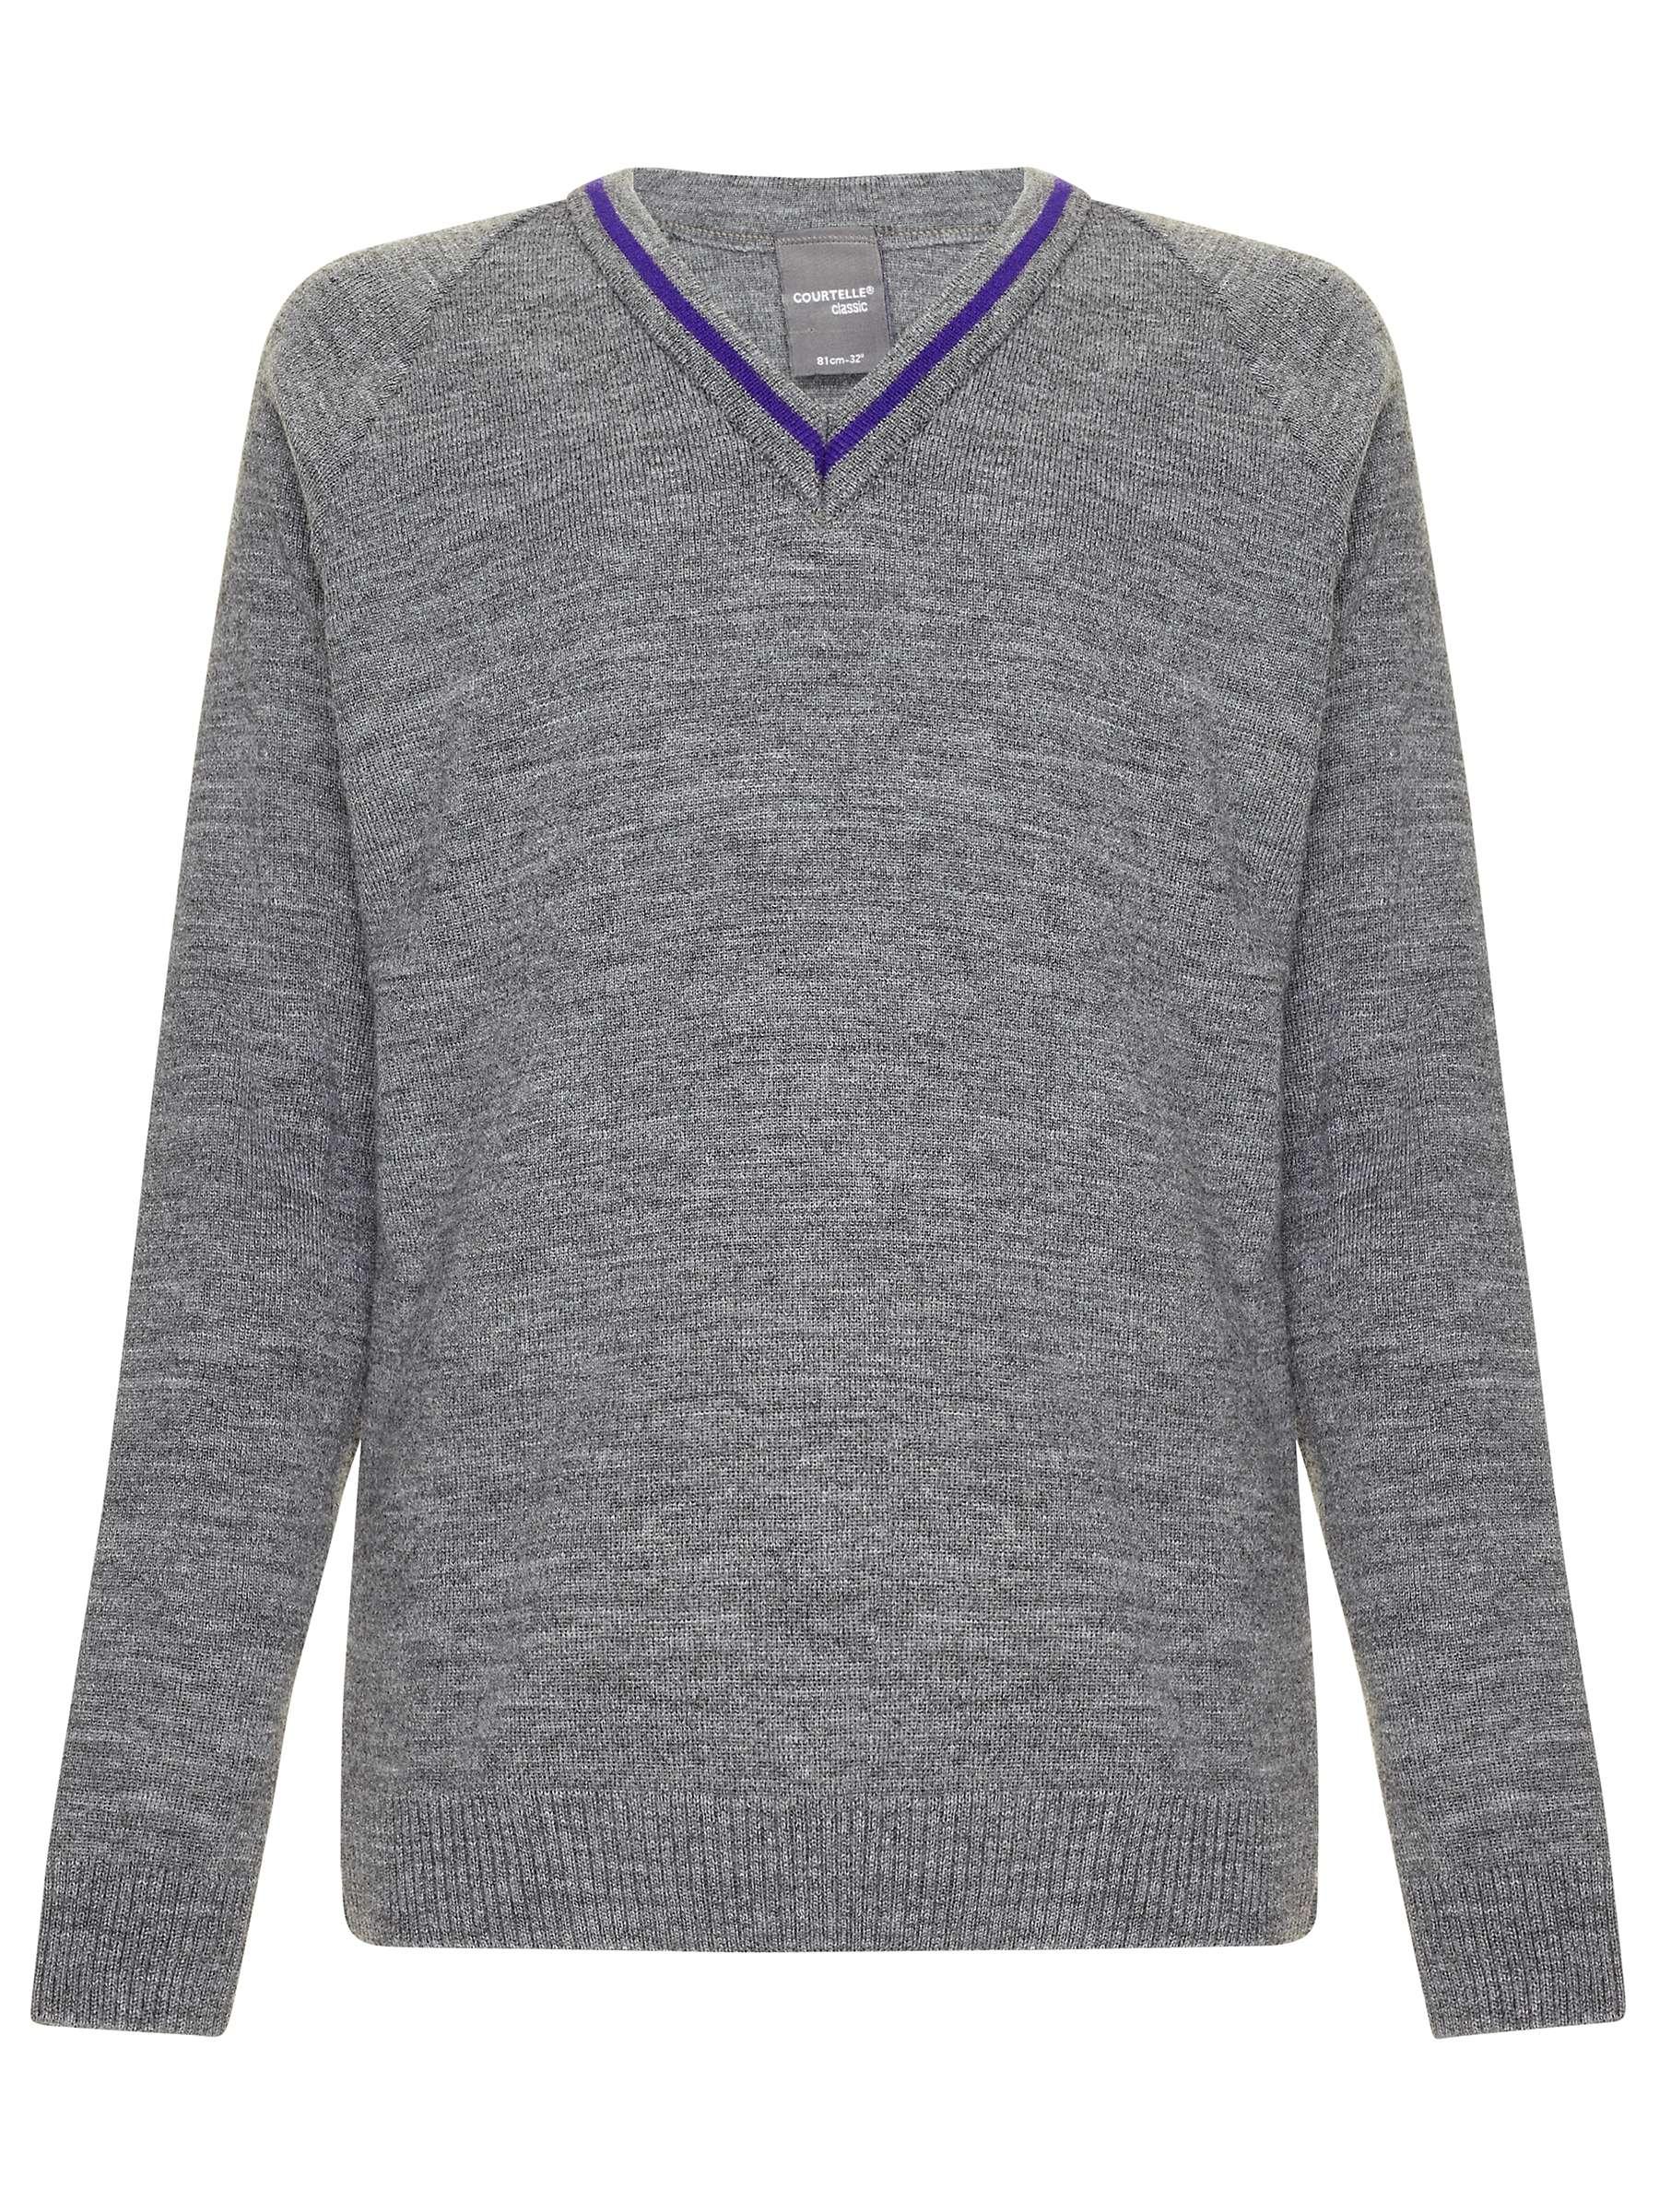 Grey Knitted Jumper with Double Purple Stripe - Schoolwear Centres | School Uniforms near me